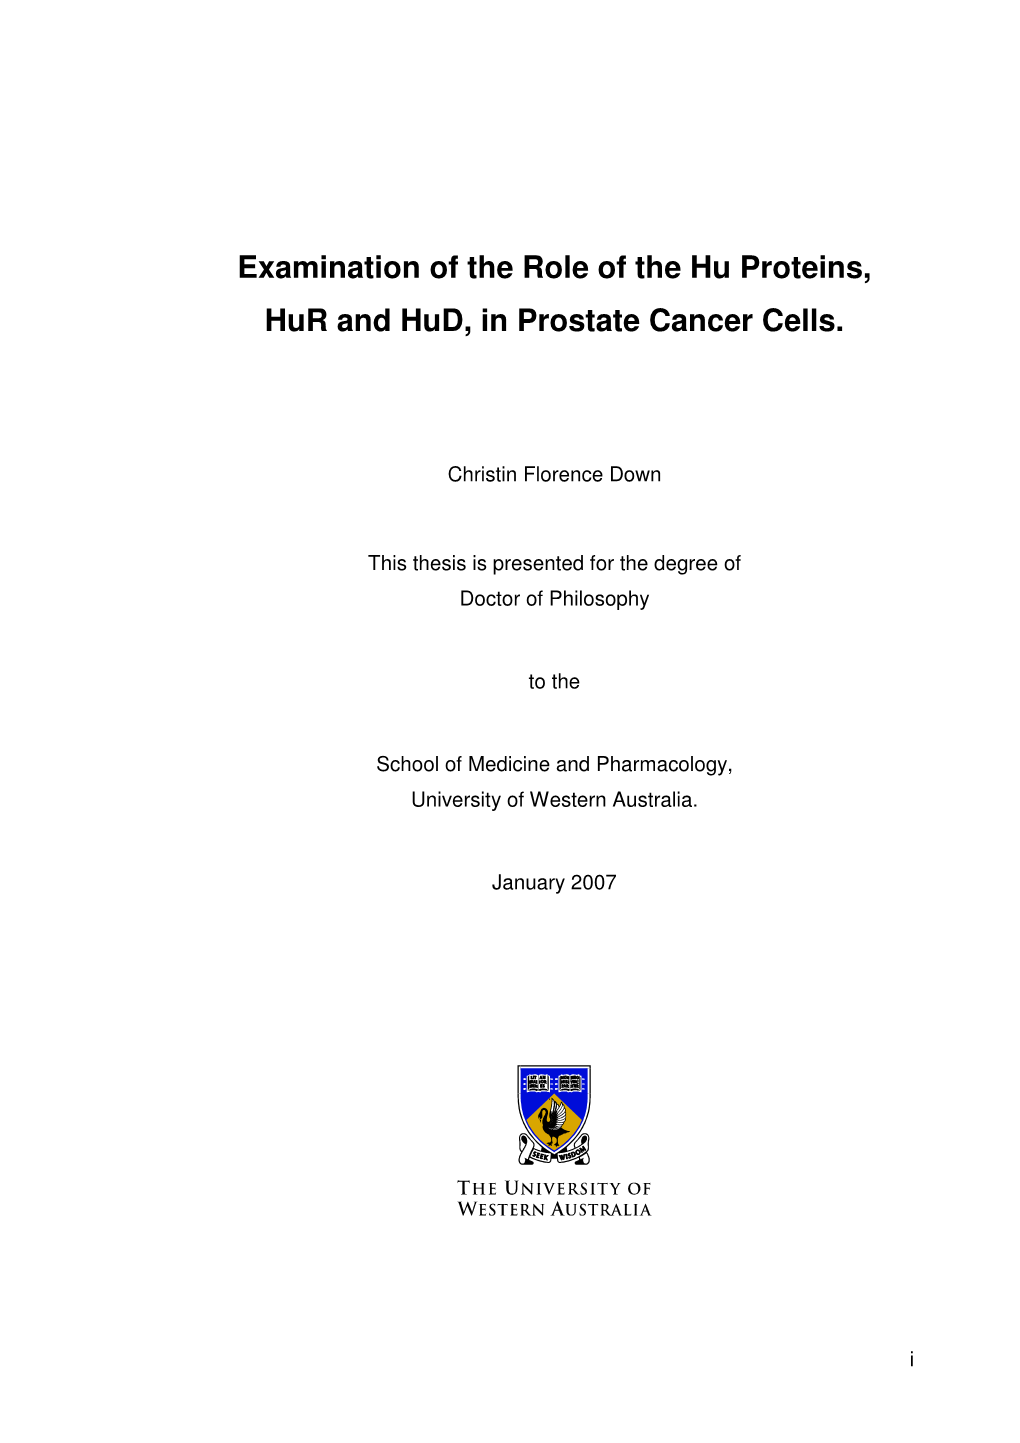 Examination of the Role of the Hu Proteins, Hur and Hud, in Prostate Cancer Cells